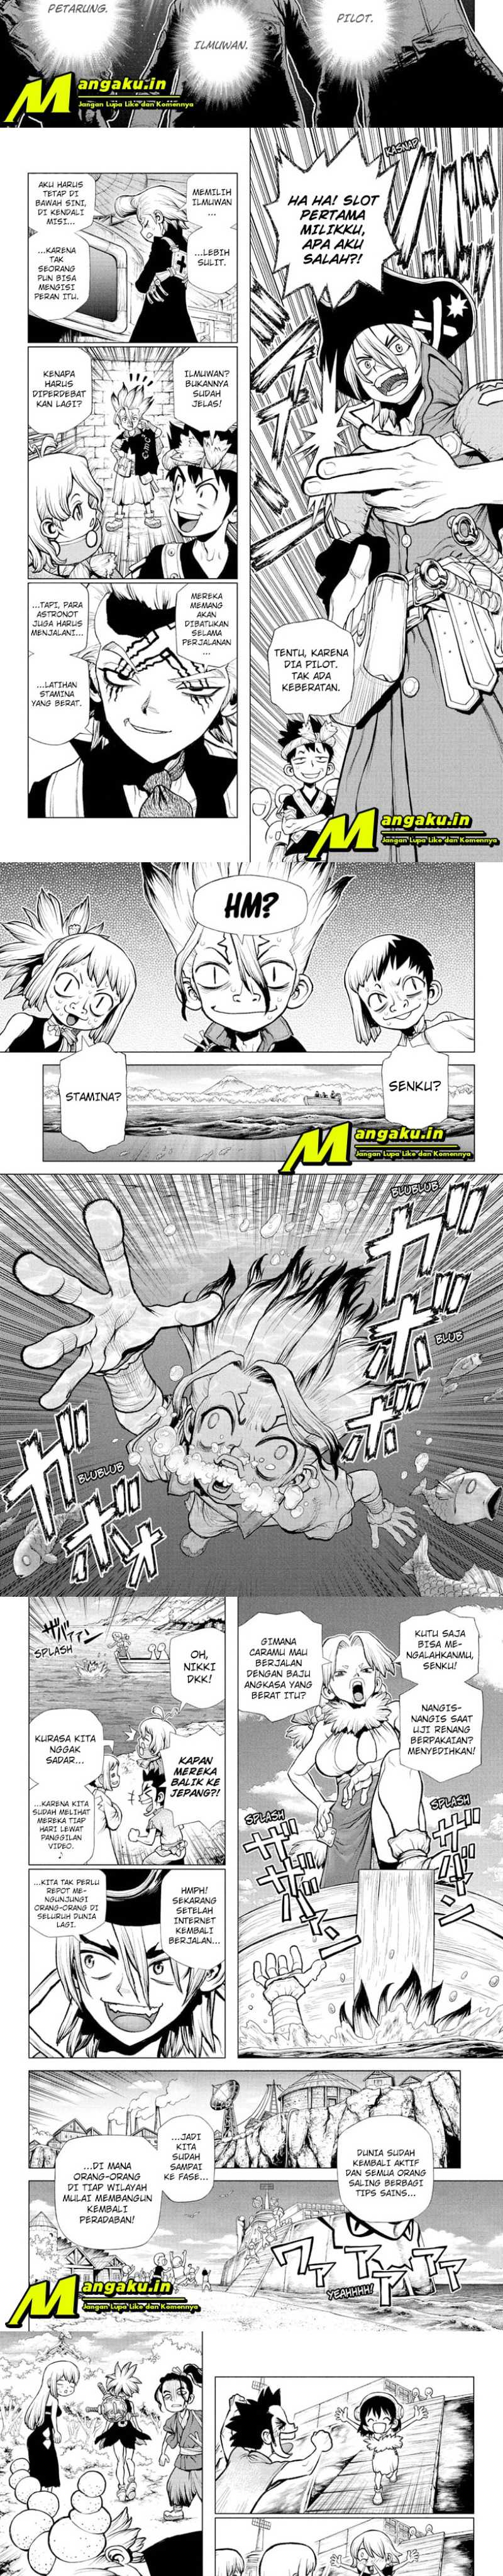 Dr. Stone Chapter 219 - 39